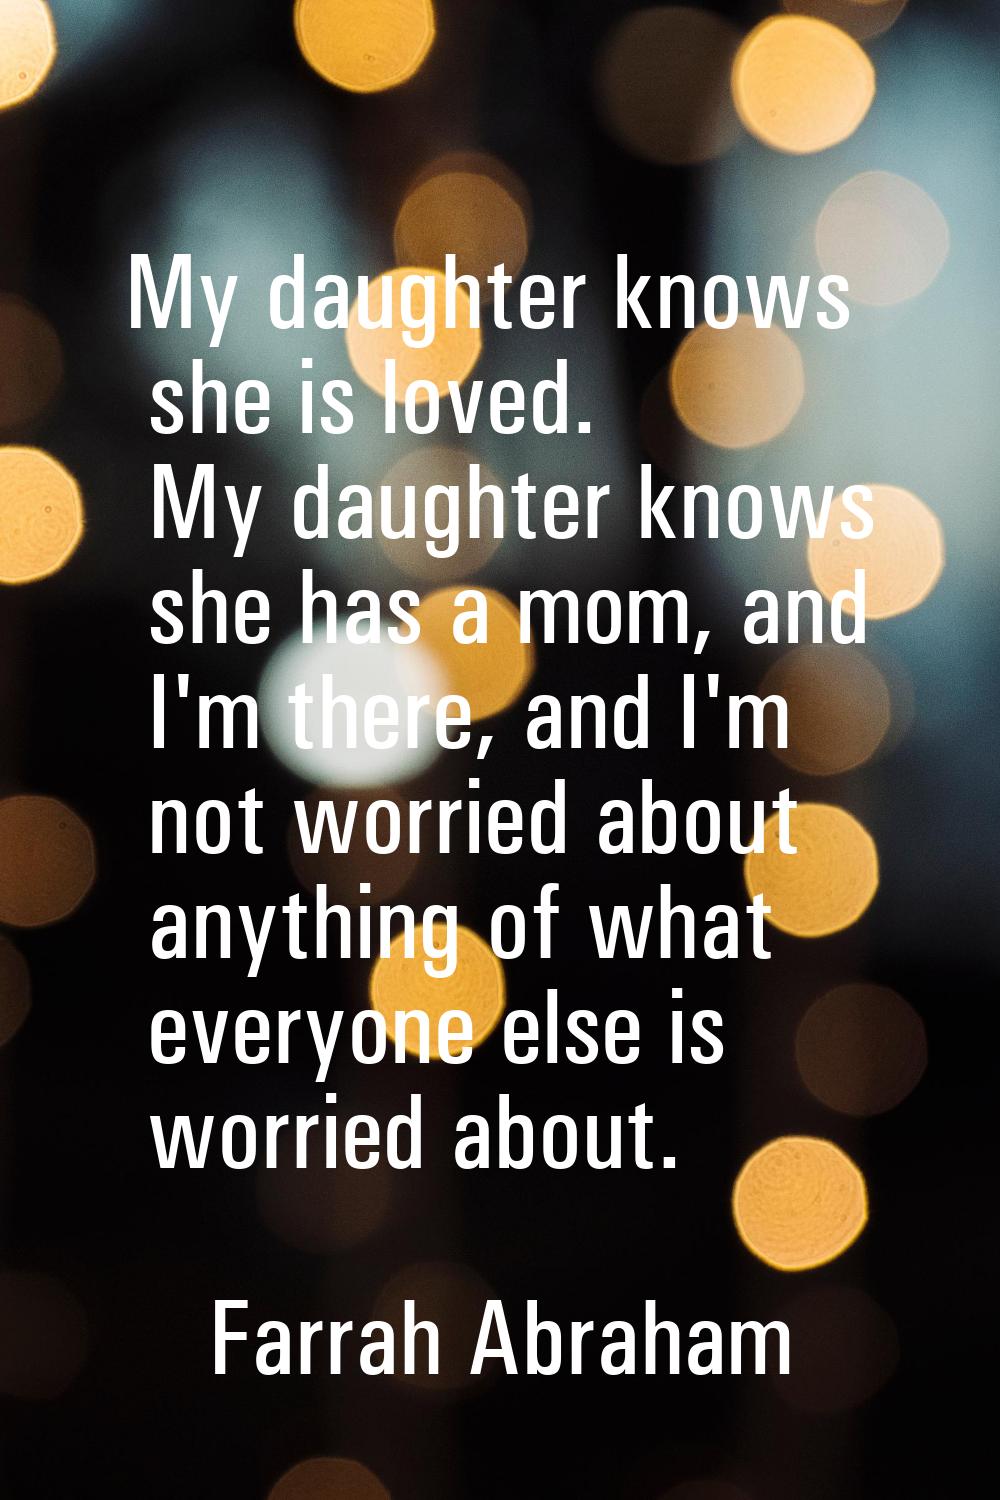 My daughter knows she is loved. My daughter knows she has a mom, and I'm there, and I'm not worried